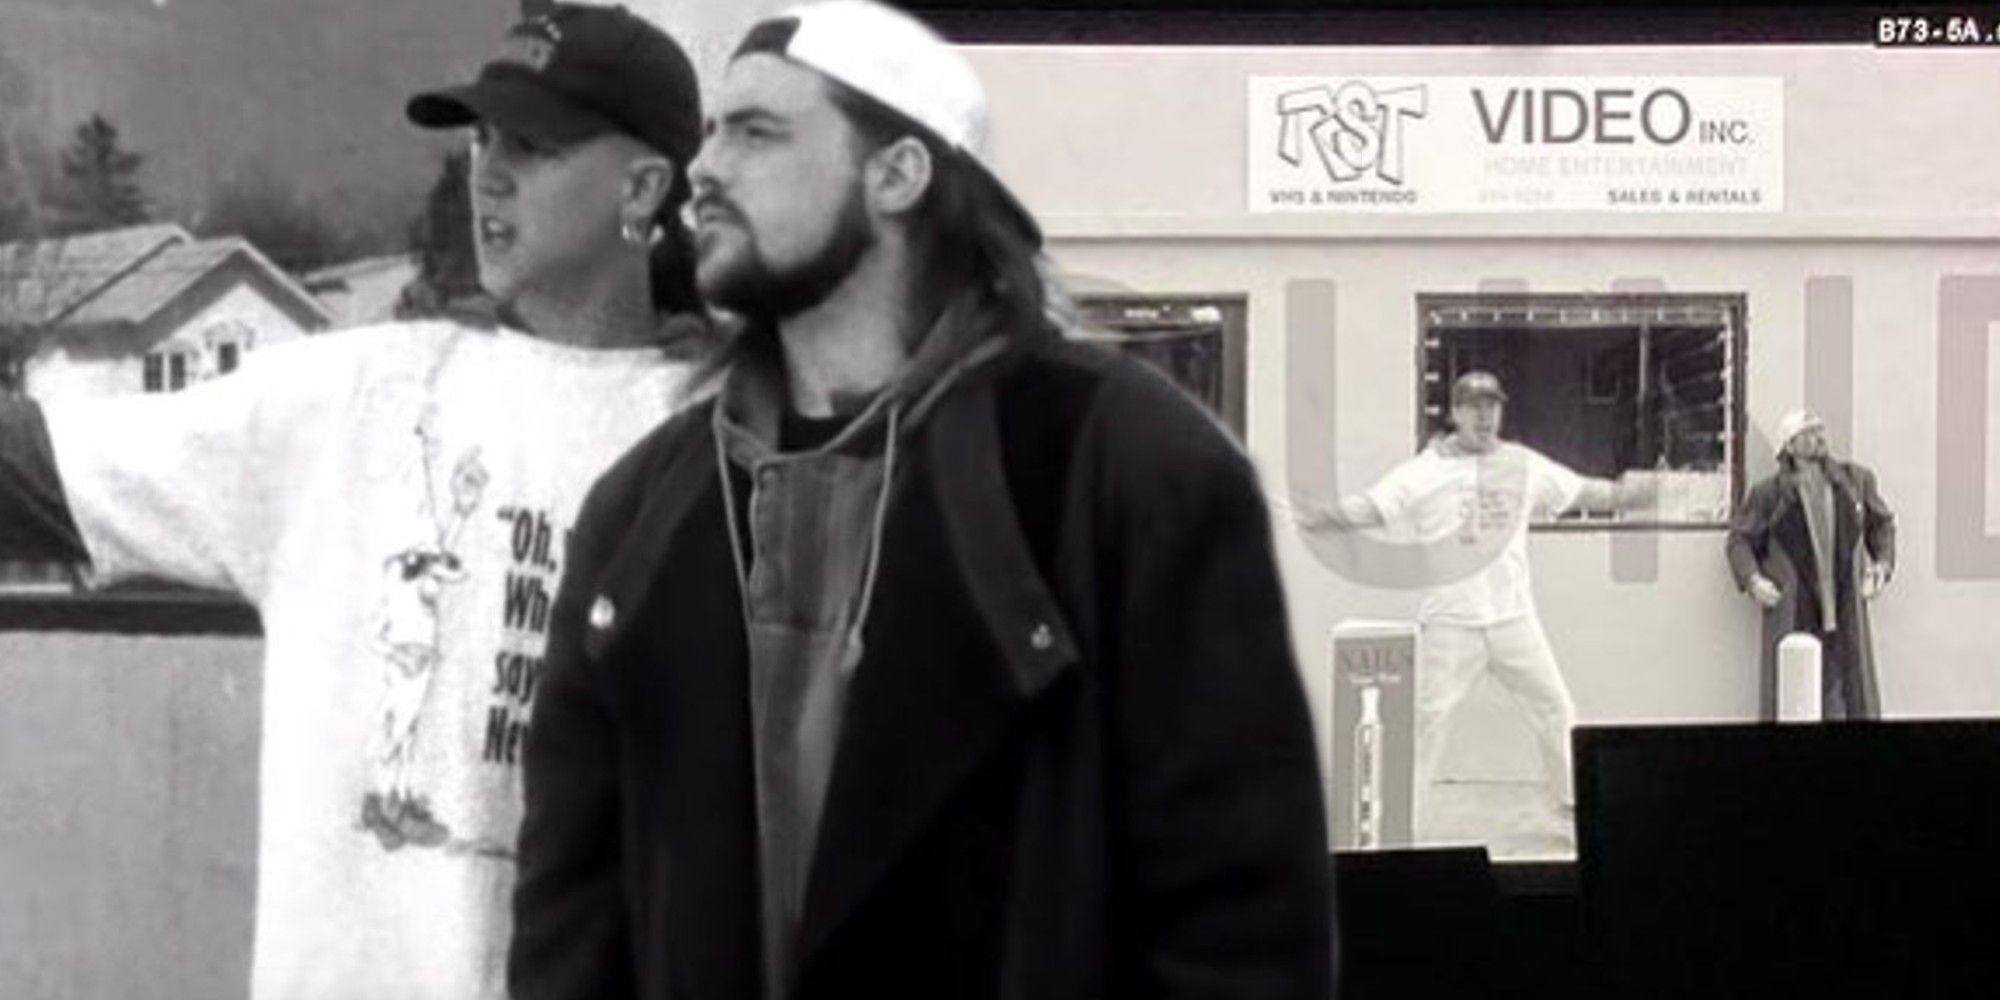 Clerks 3 Jason Mewes and Kevin Smith as Jay and Silent Bob